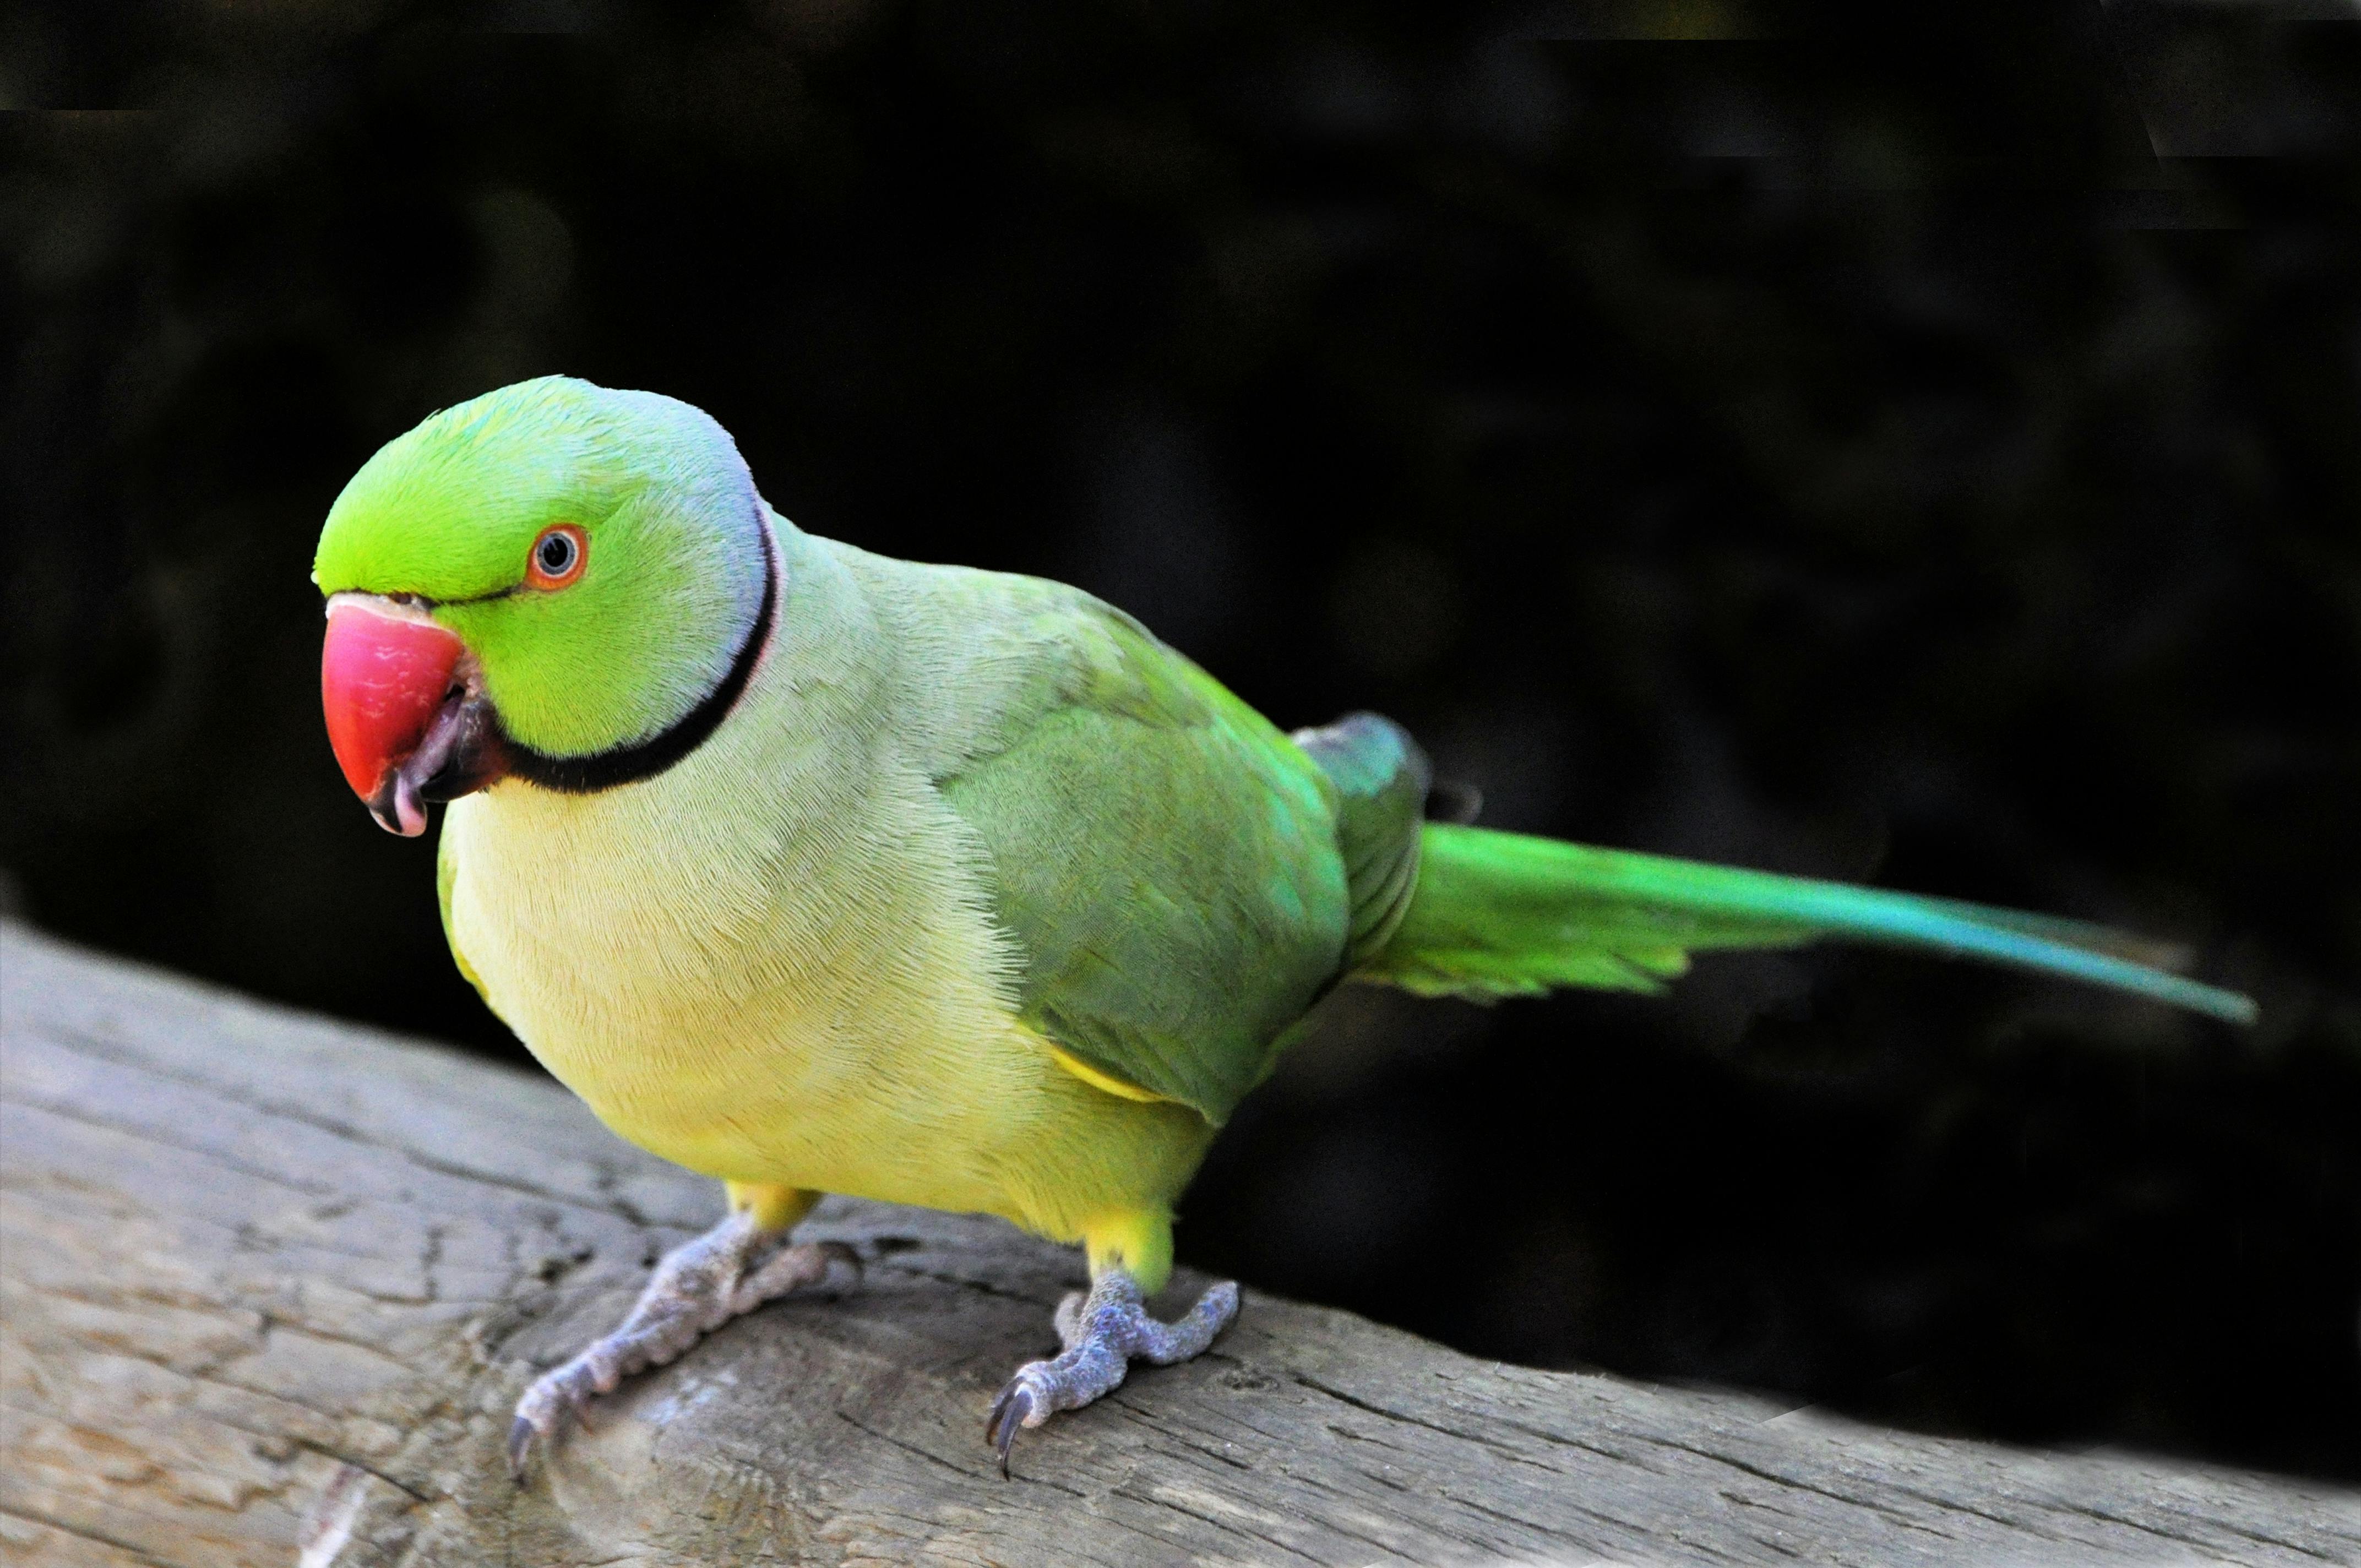 Parrot Photos Download The Best Free Parrot Stock Photos And Hd Images